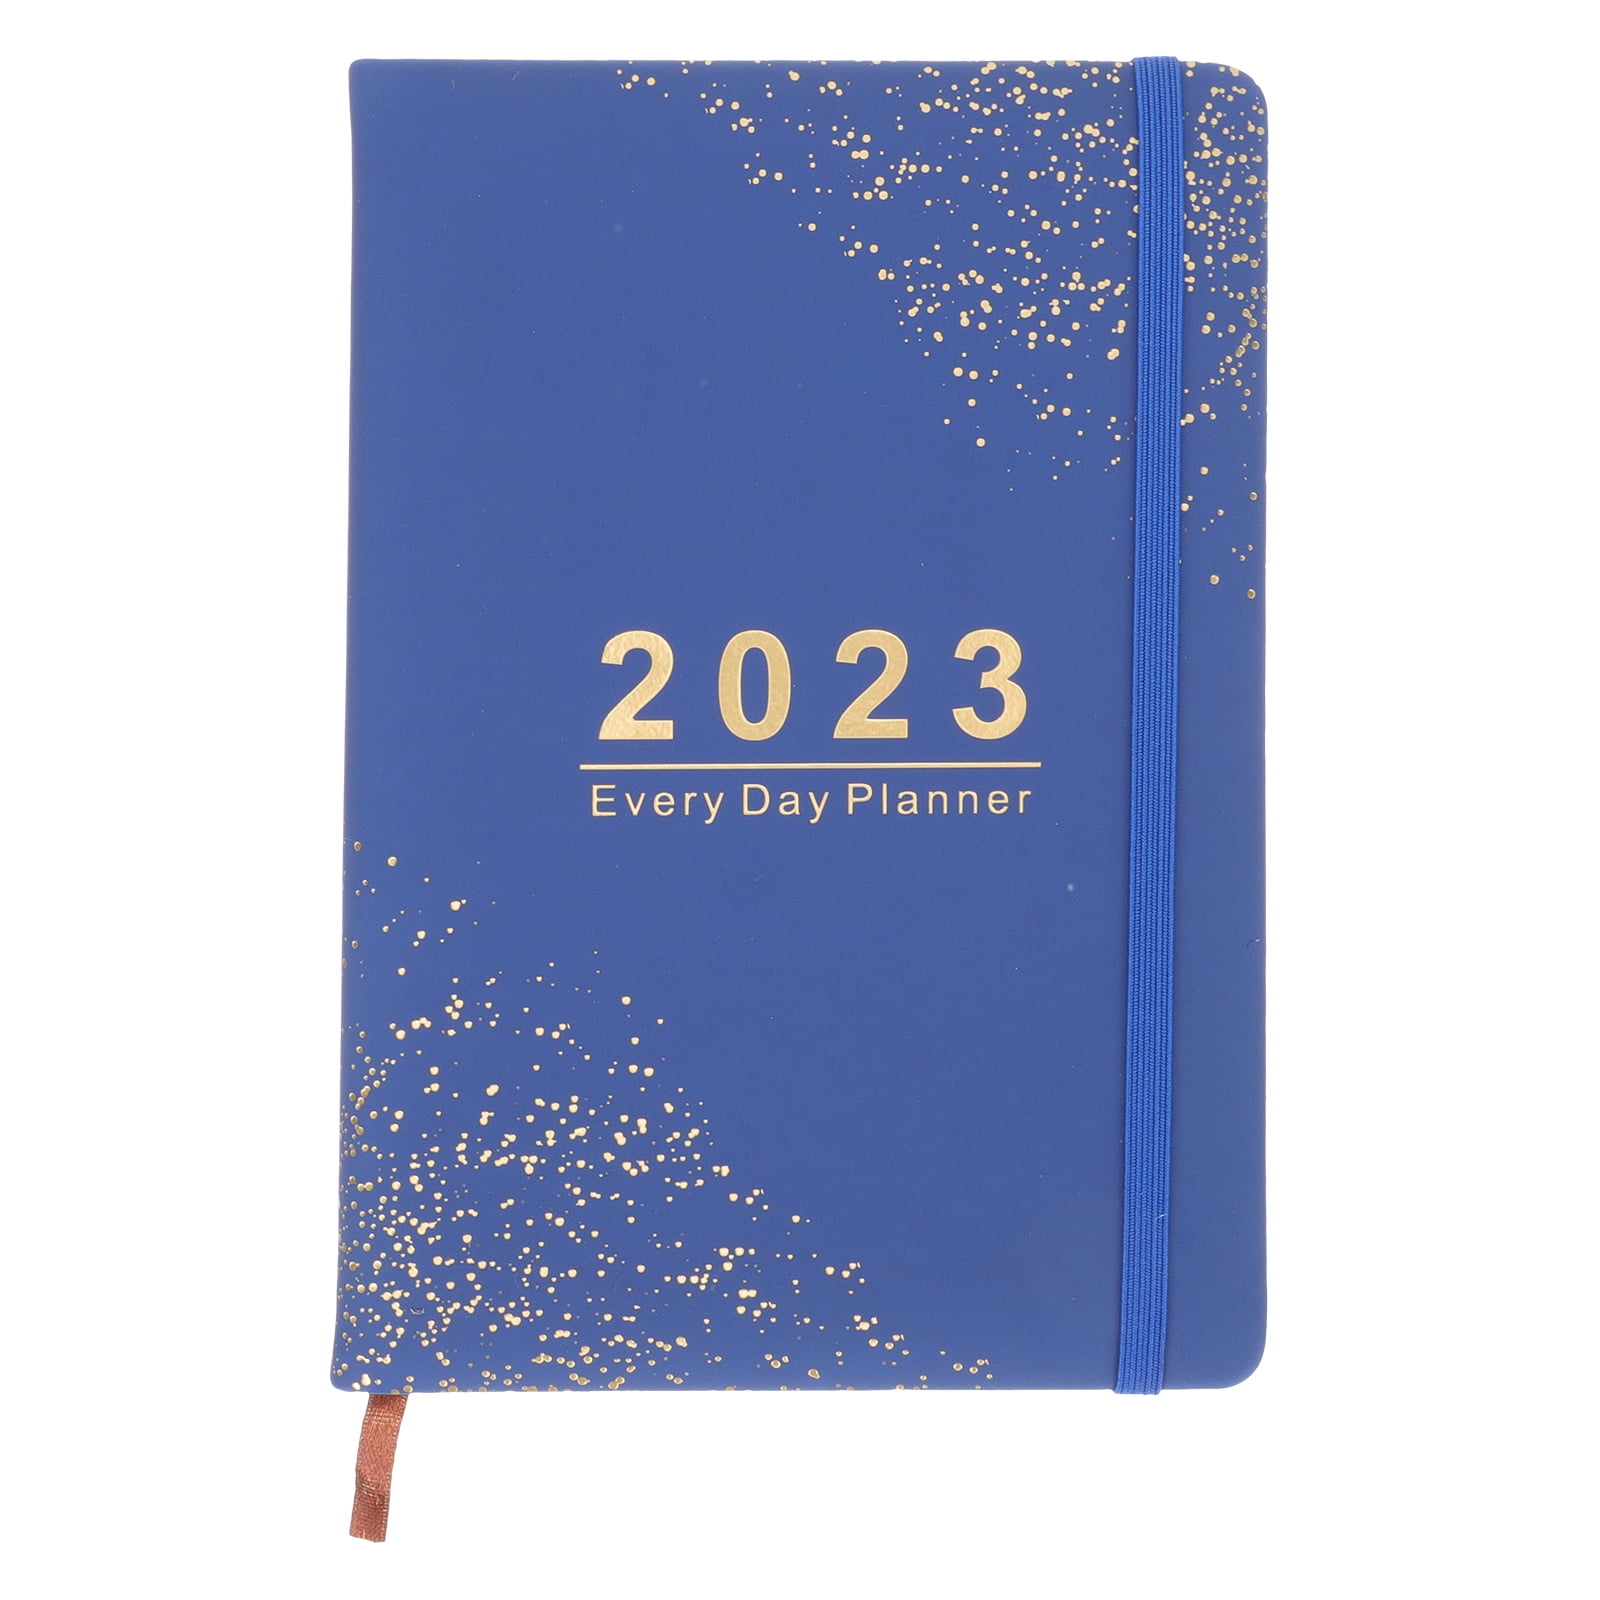 Planner 2023 Notebook Book June 2022 Daily Appointment Diary Calendar ...